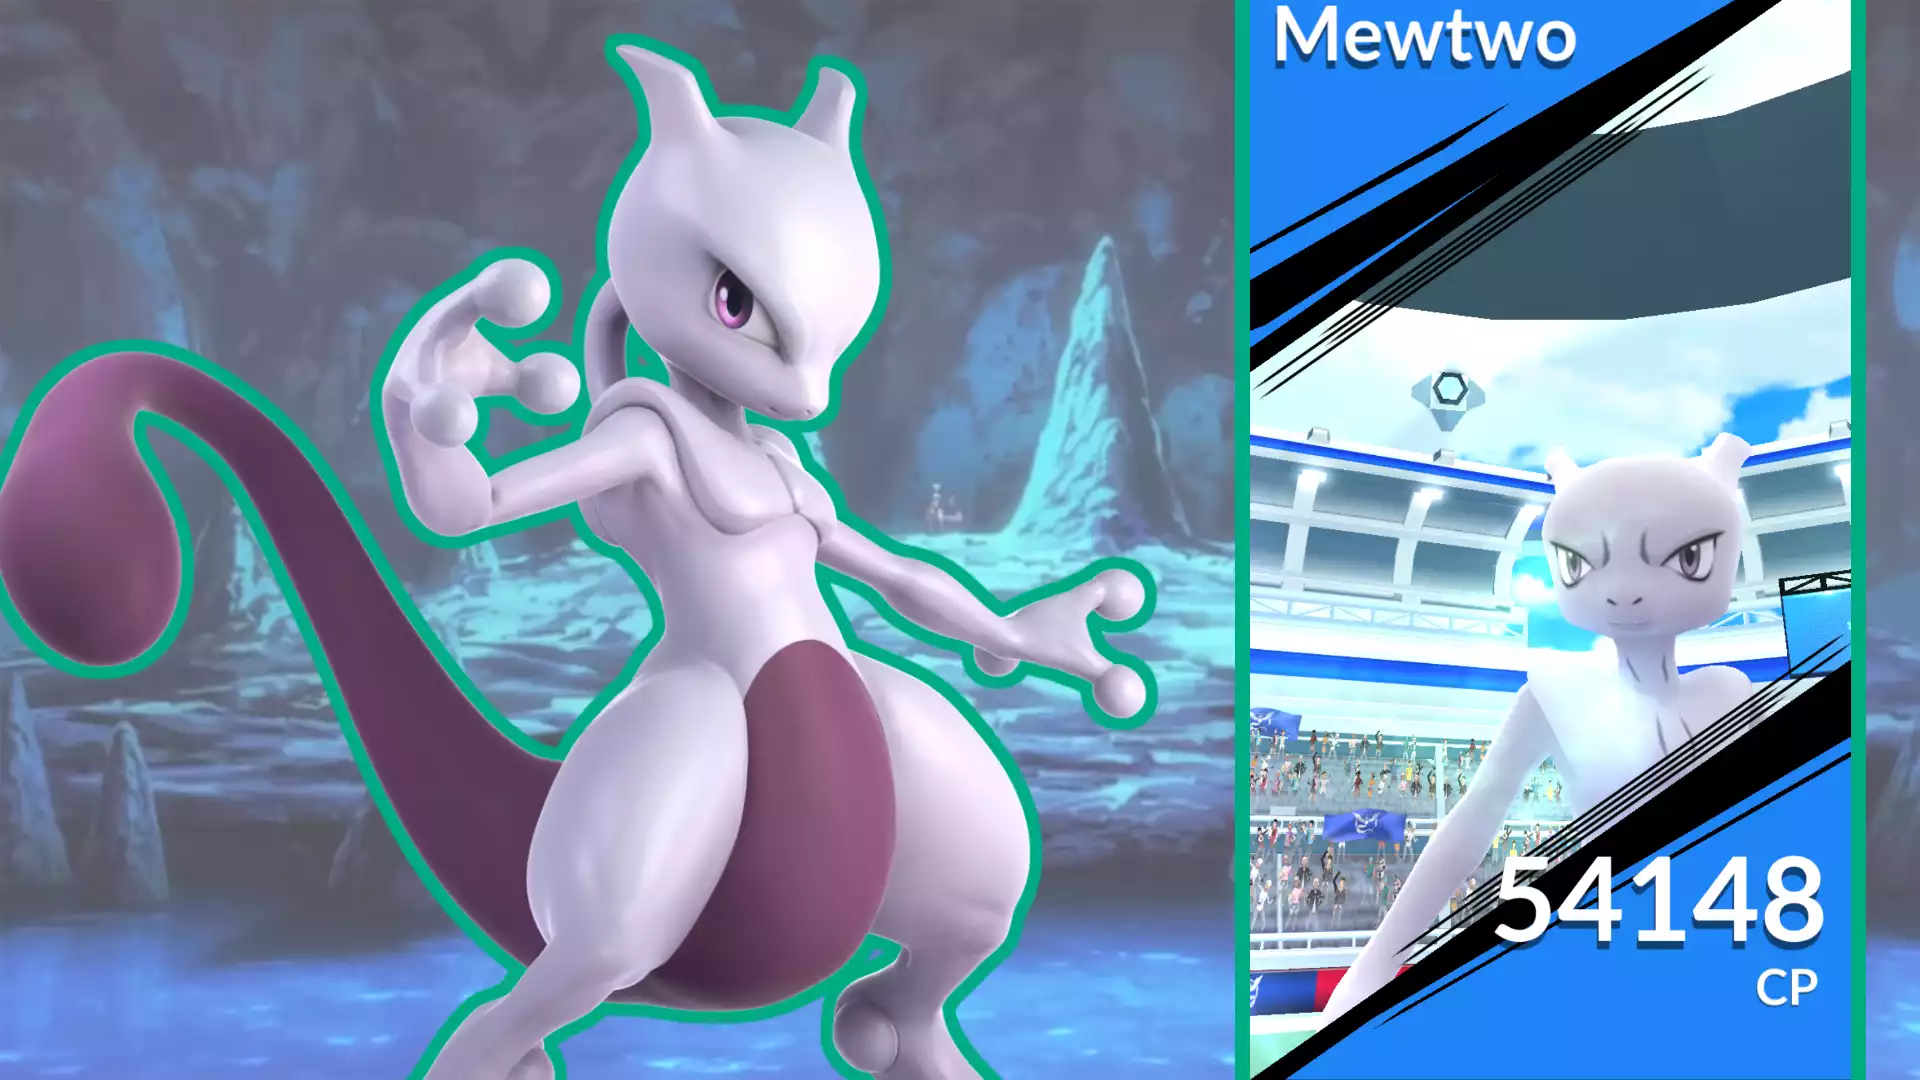 Pokemon GO Mewtwo Counters, Weakness, Best Movesets, & Movesets